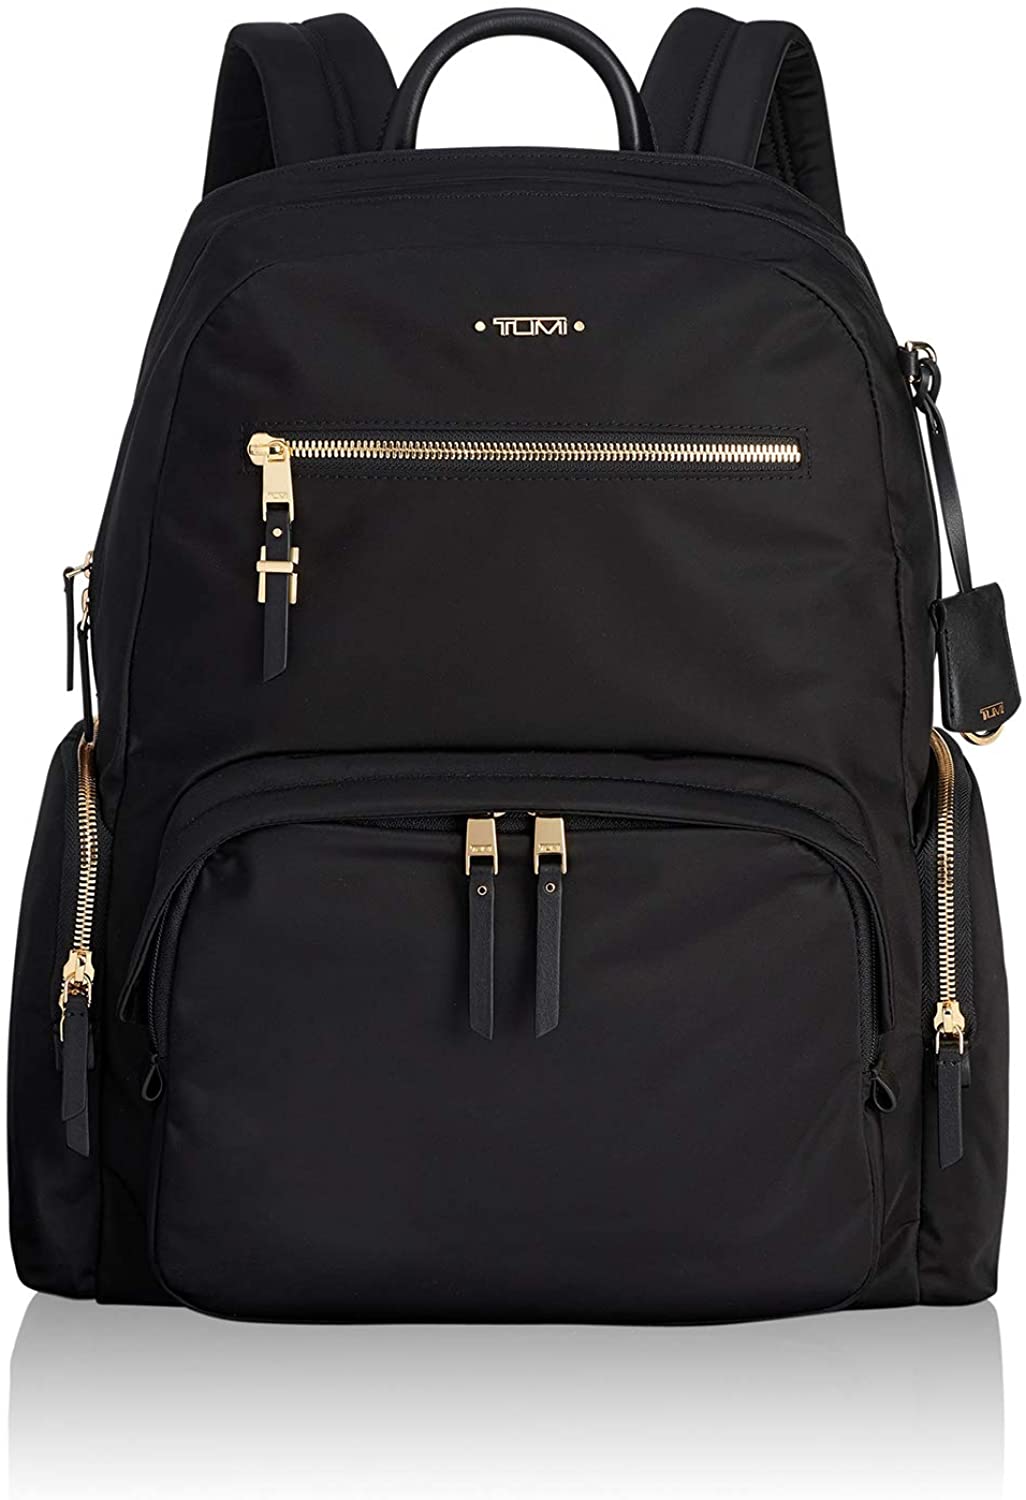 TUMI - Voyageur Carson Laptop Backpack - 15 Inch Computer Bag for Women - image 1 of 6